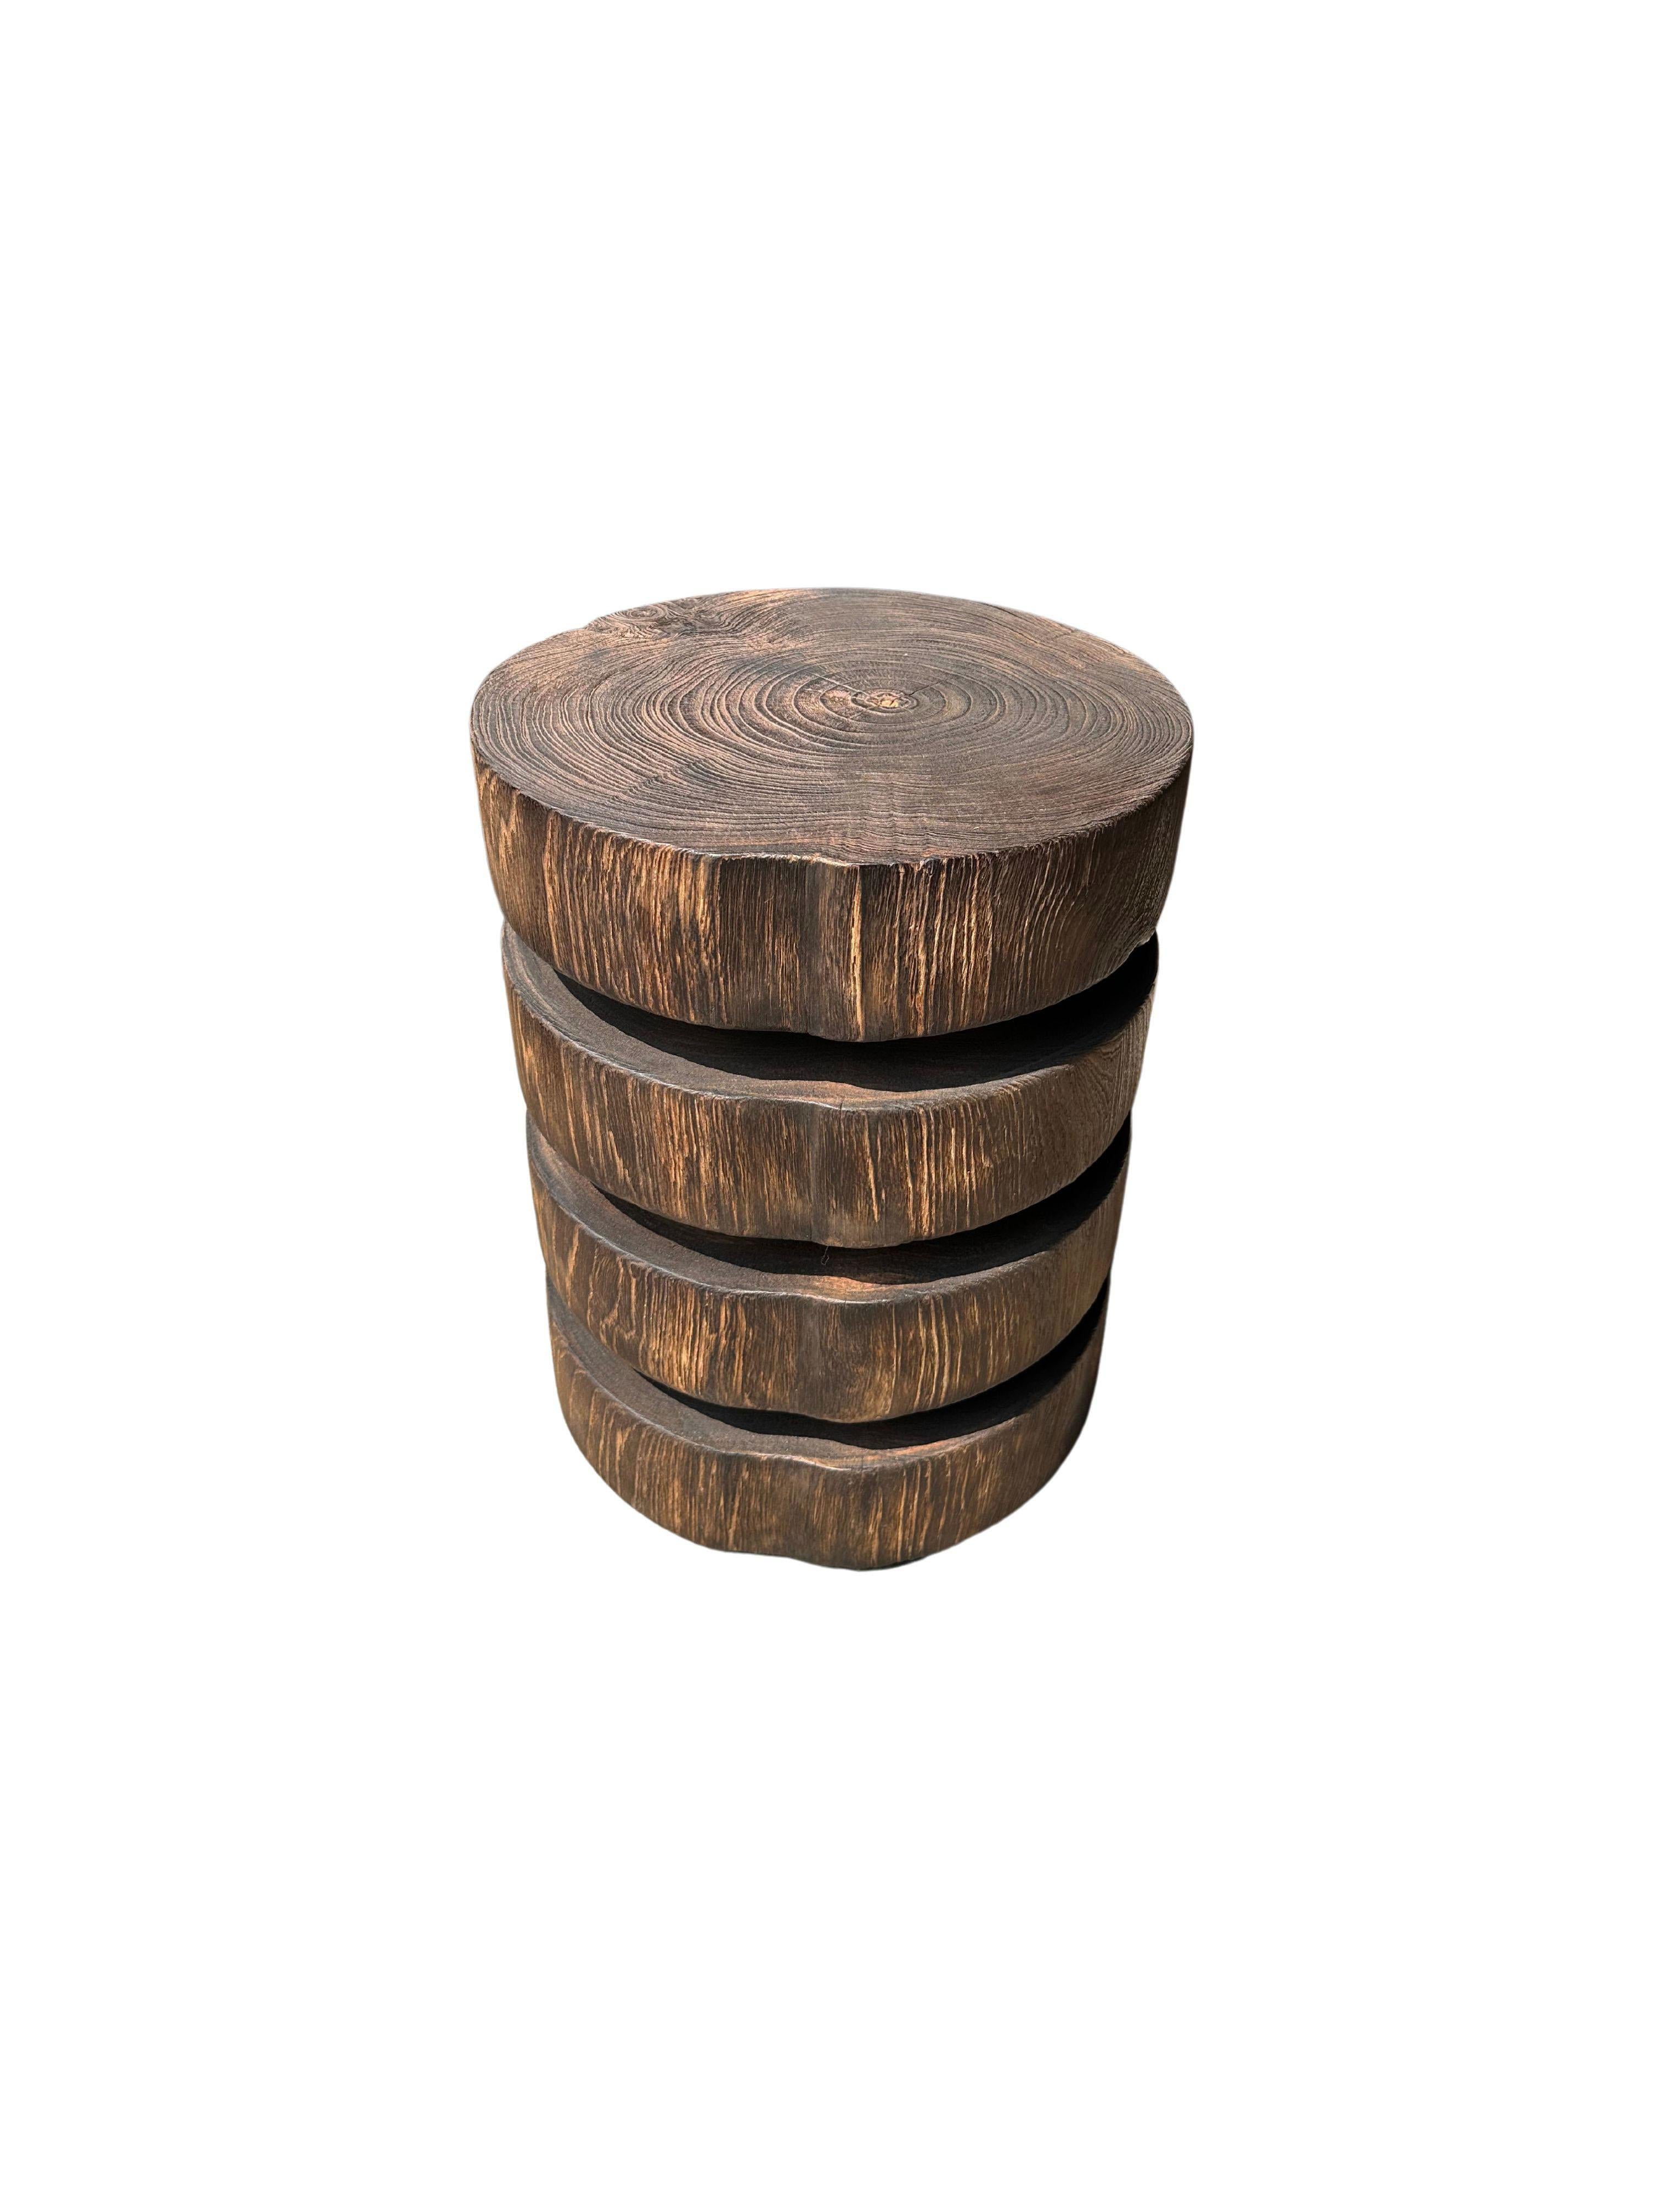 A wonderfully sculptural round side table featuring a natural finish. Its neutral pigment and subtle wood texture makes it perfect for any space. This table was crafted from solid suar wood, made to resemble stacked slabs of suar wood this table was